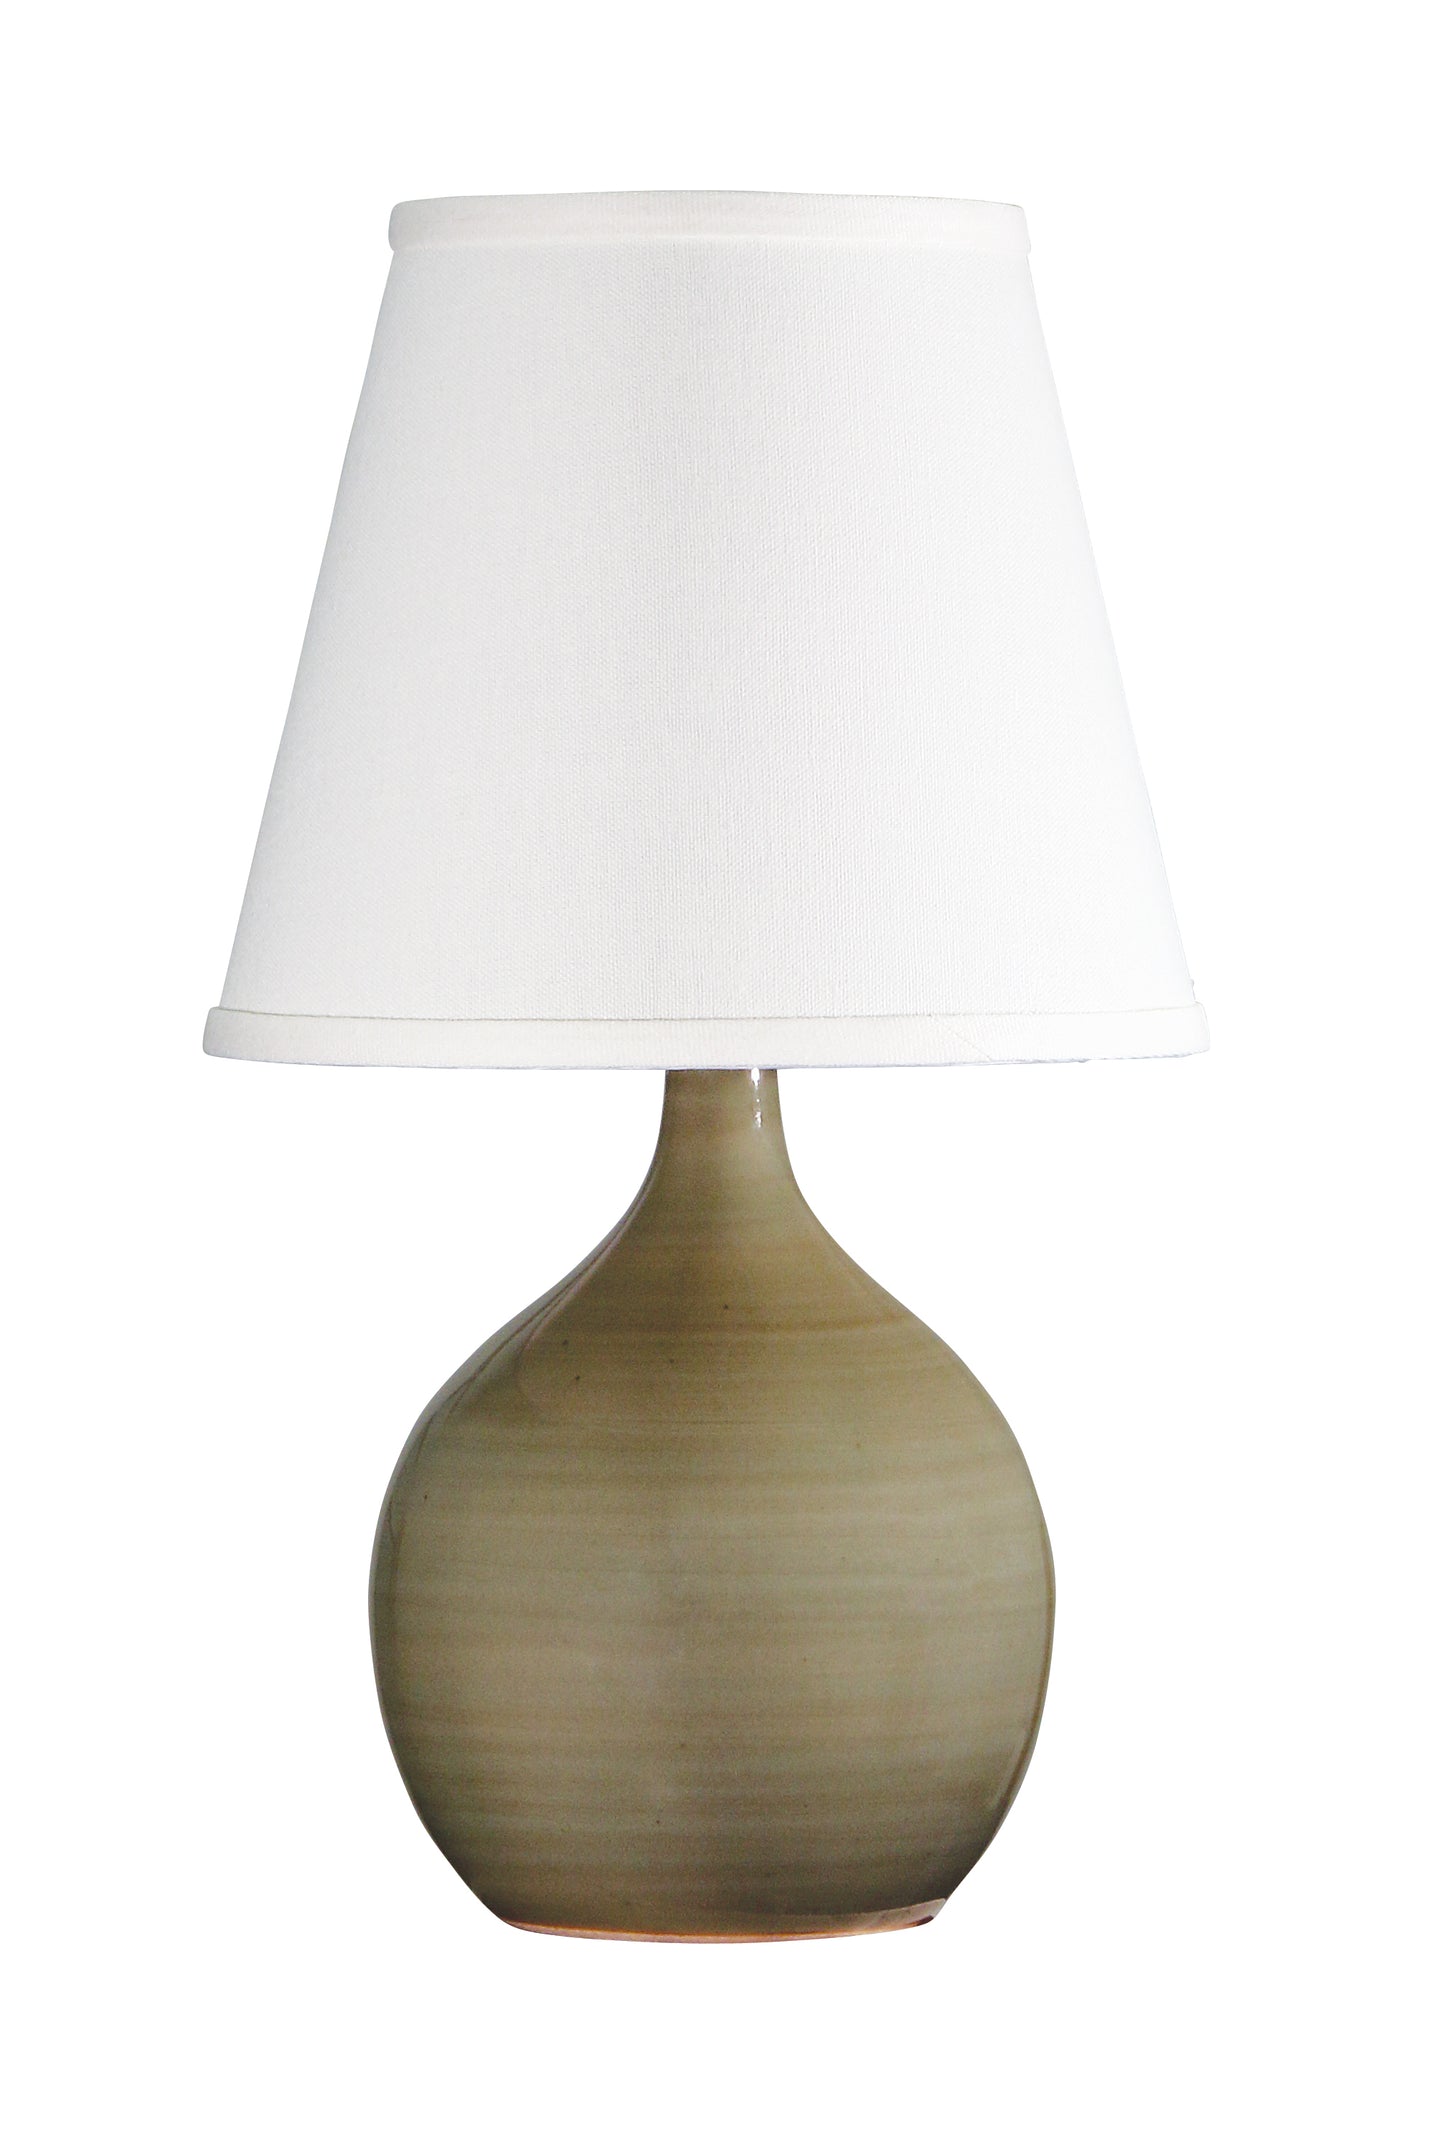 House of Troy Scatchard 13.5" Mini Accent Lamp Celadon GS50-CG